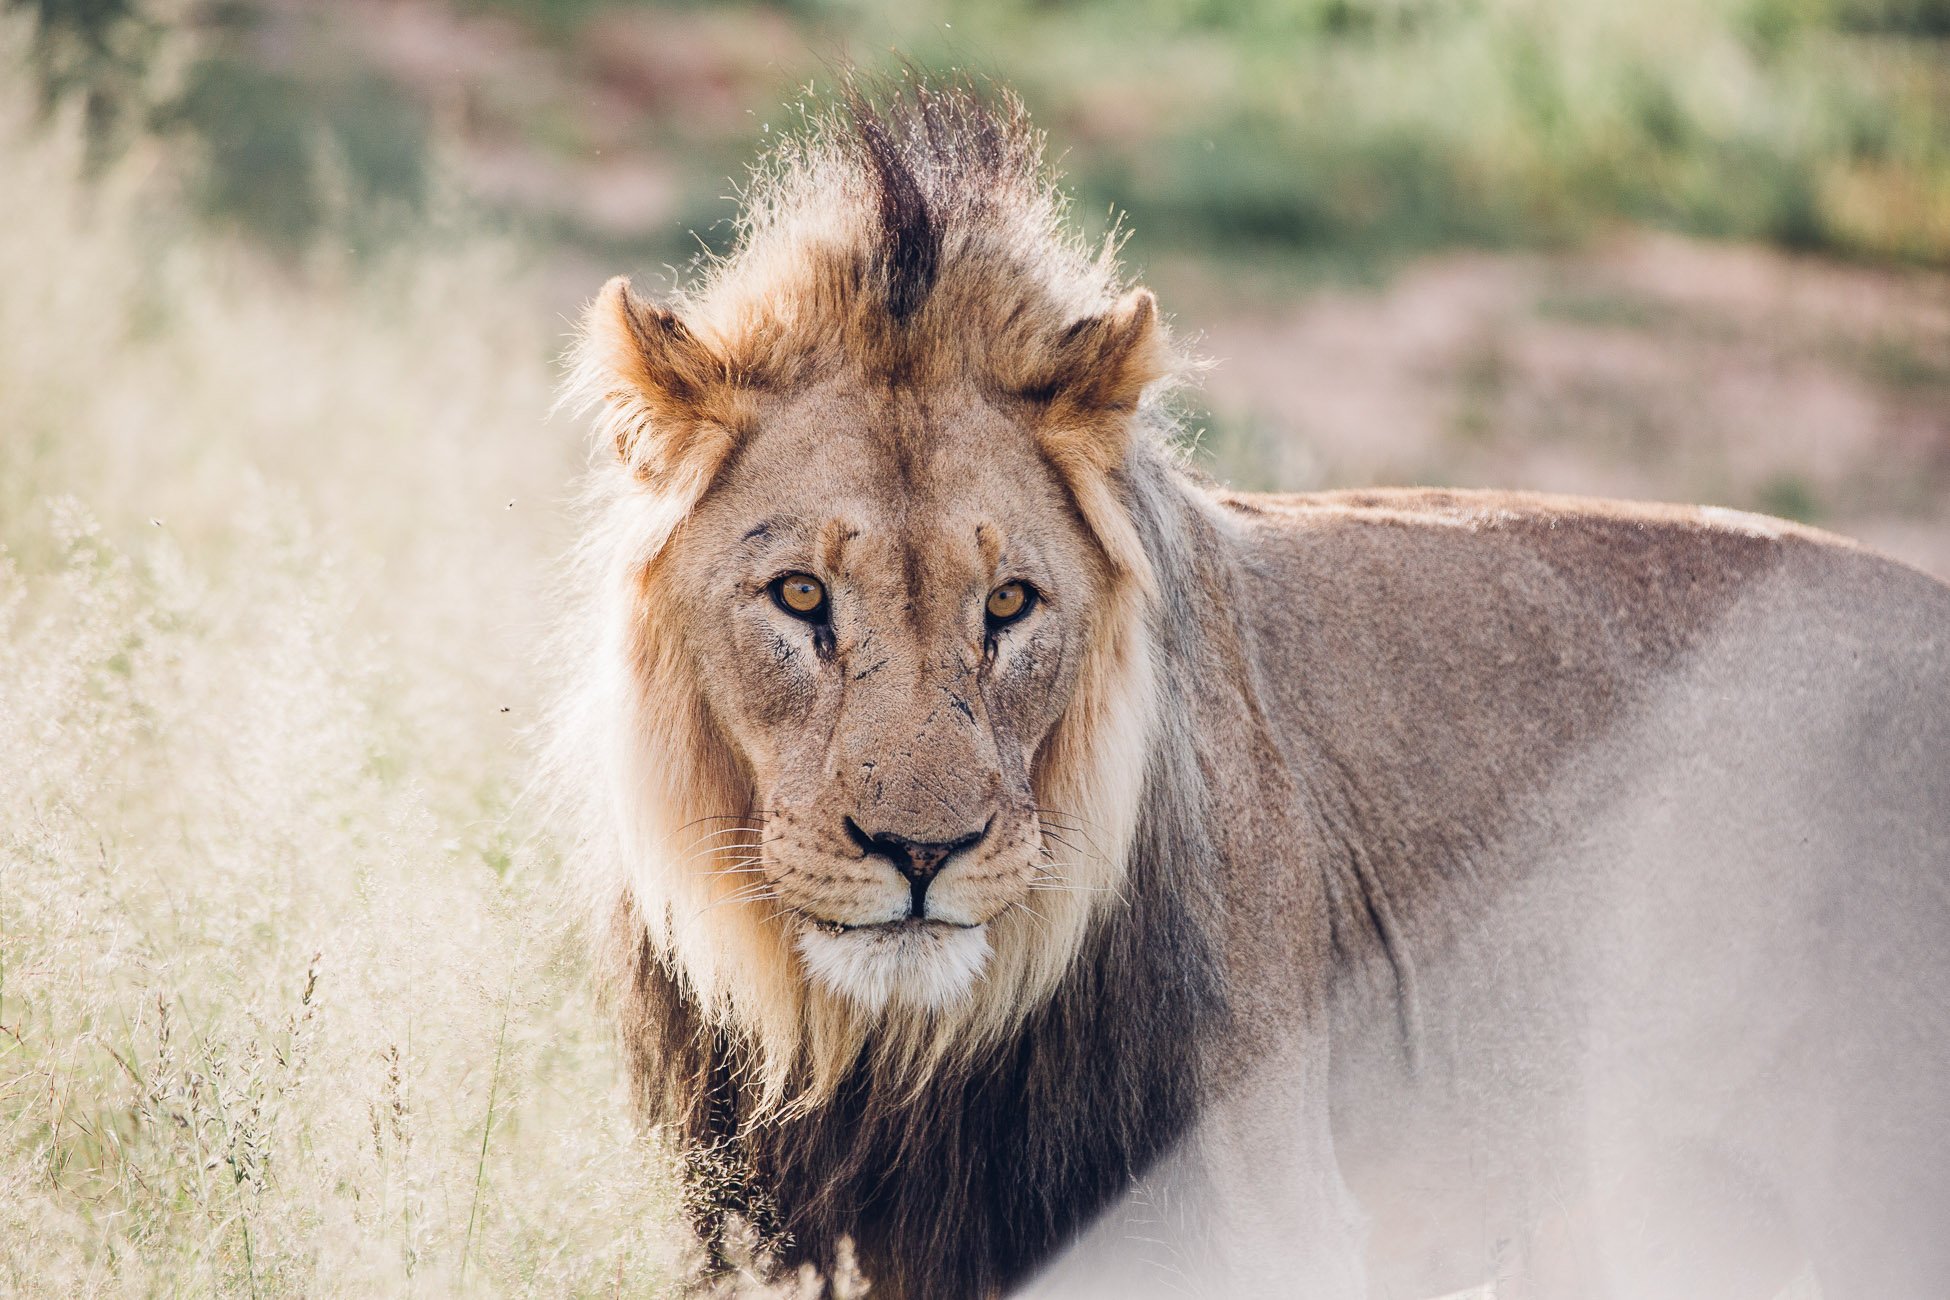 Male lion at a Safari in Namibia